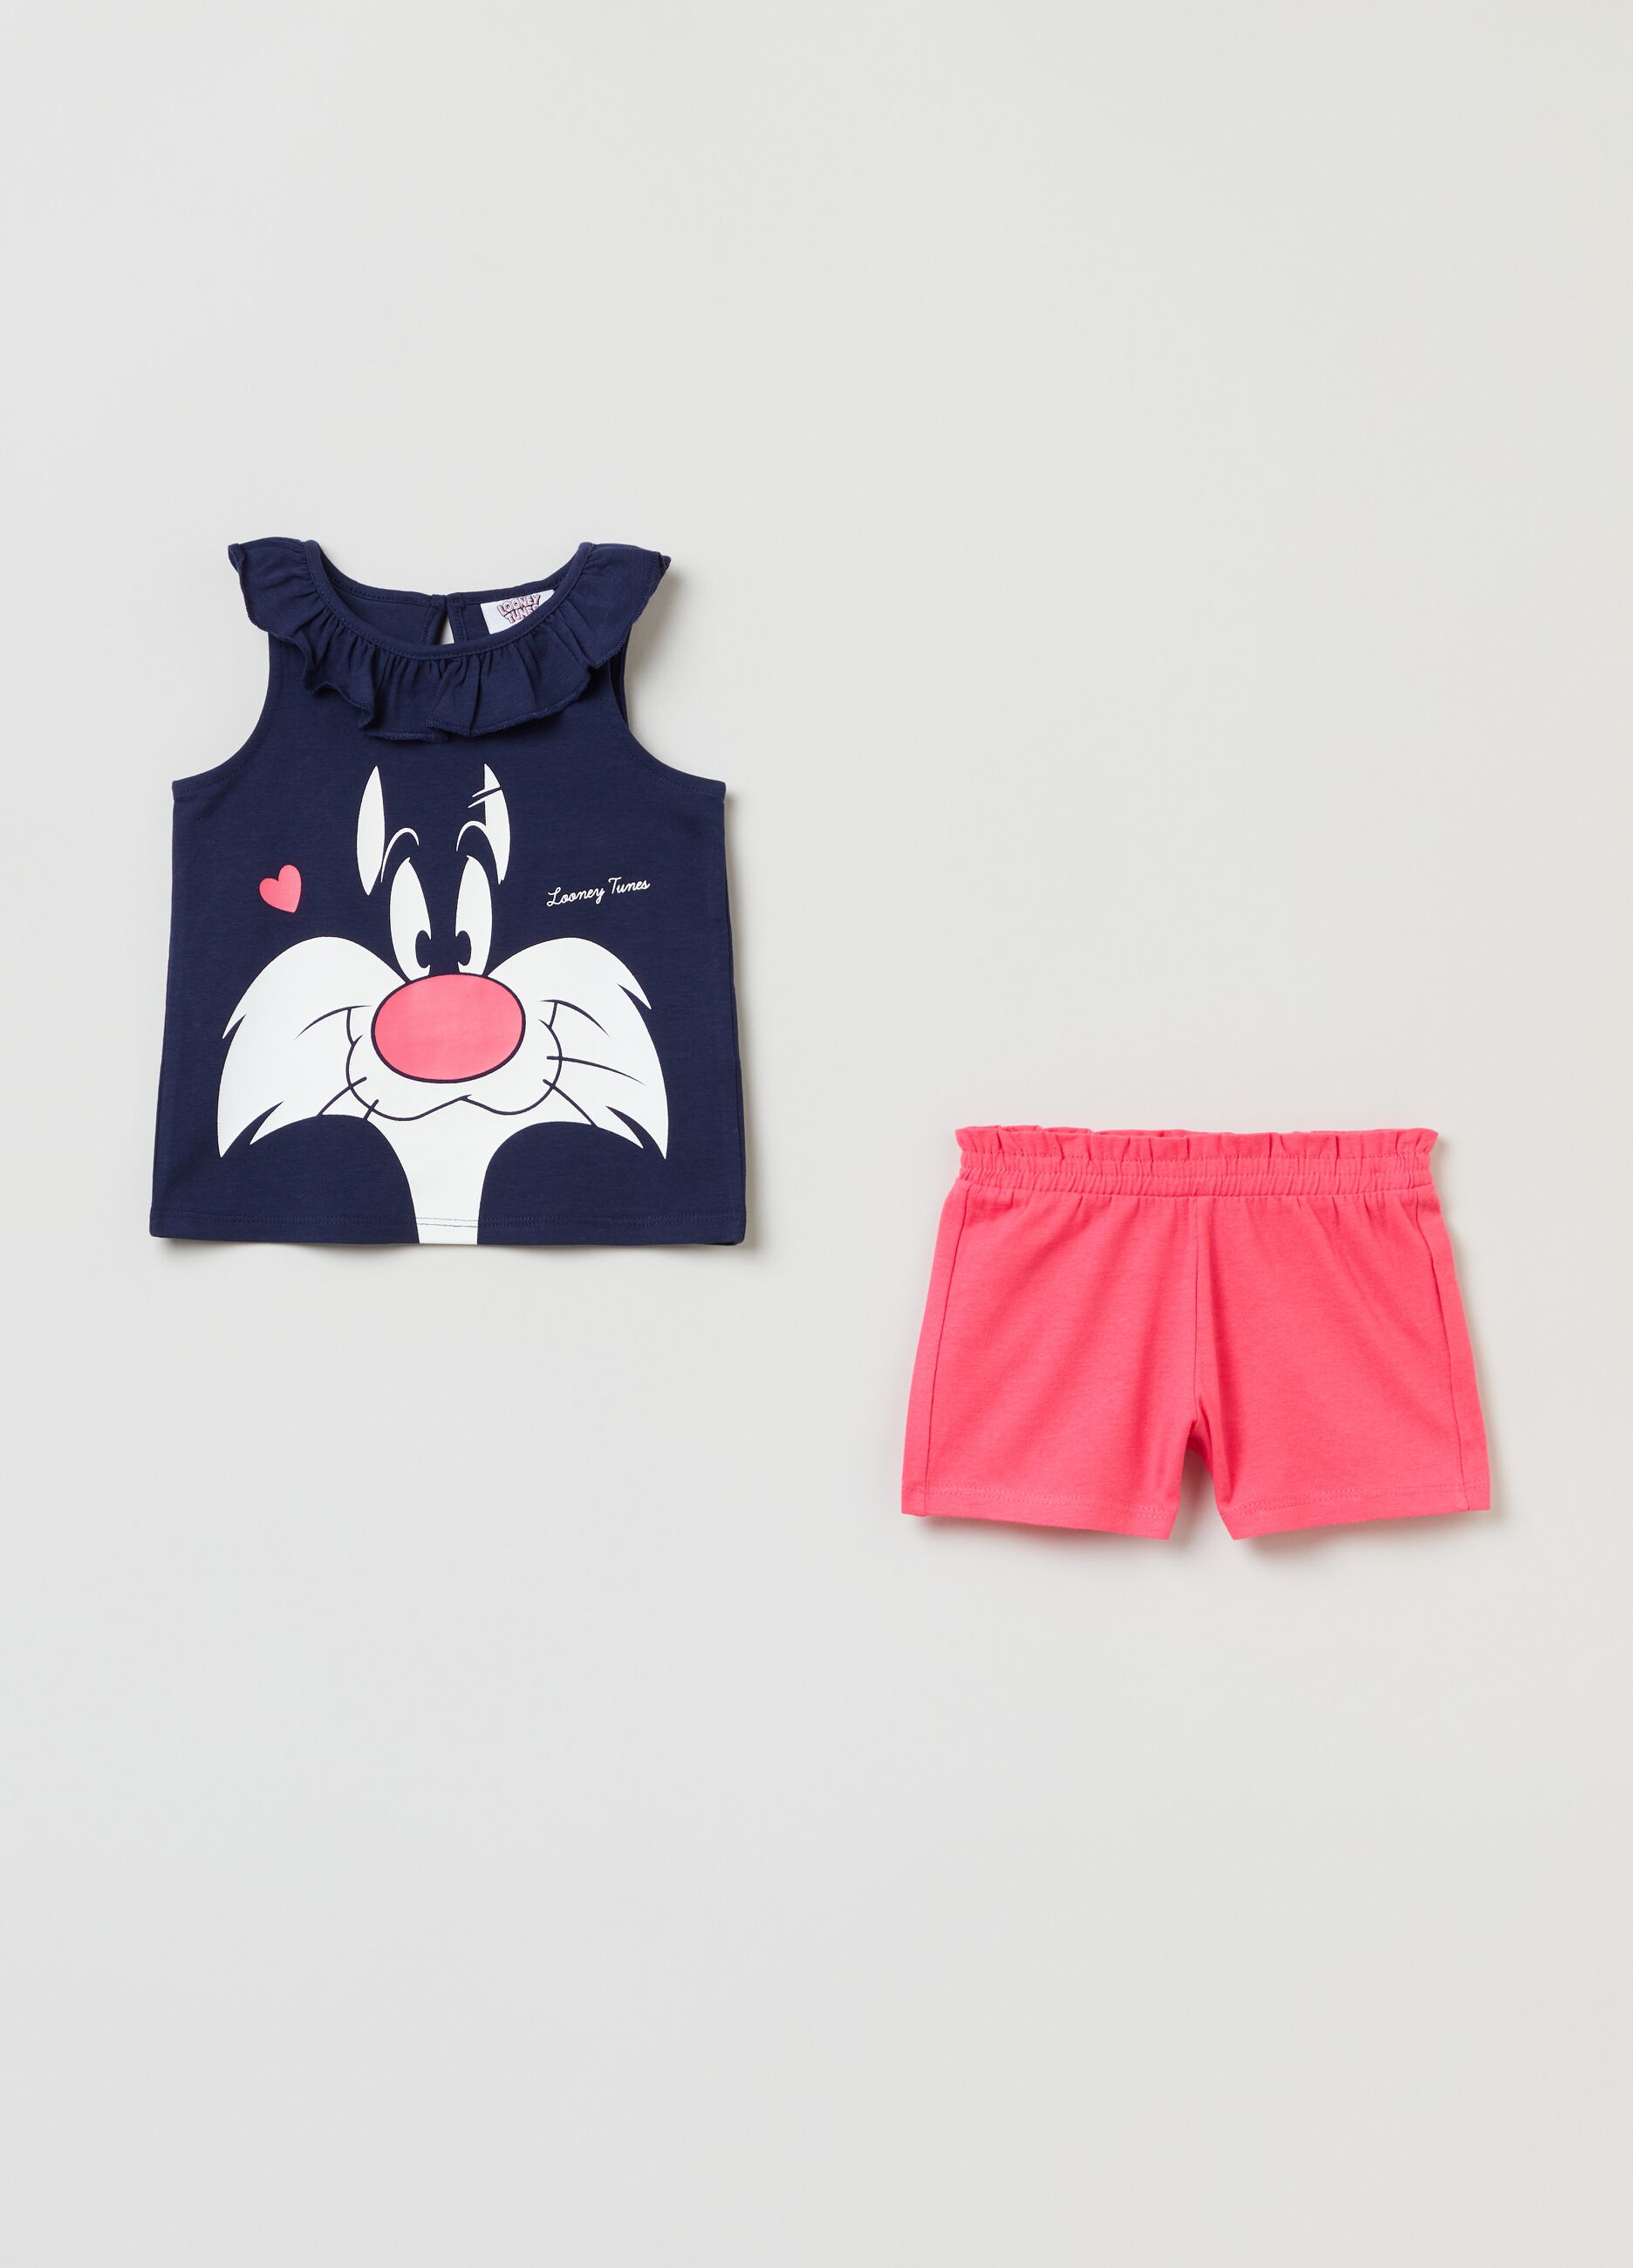 Sylvester the Cat jogging set with tank top and shorts